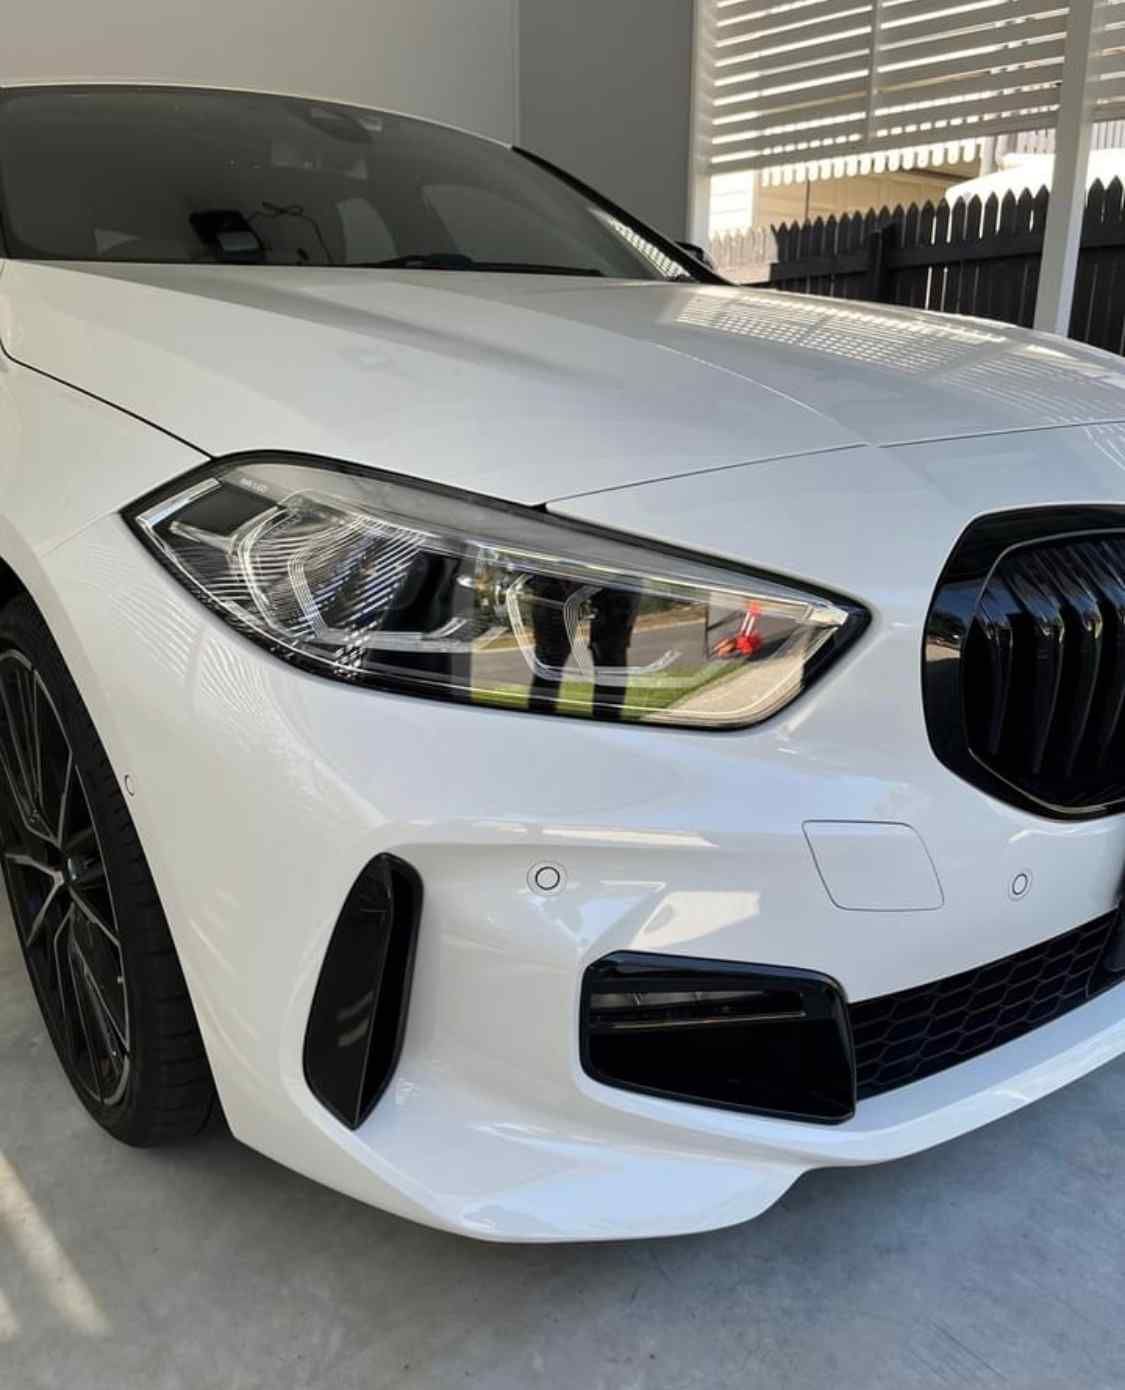 A White Bmw 1 Series Is Parked In A Garage  — Rapid Auto Refinish in Toowoomba, QLD 